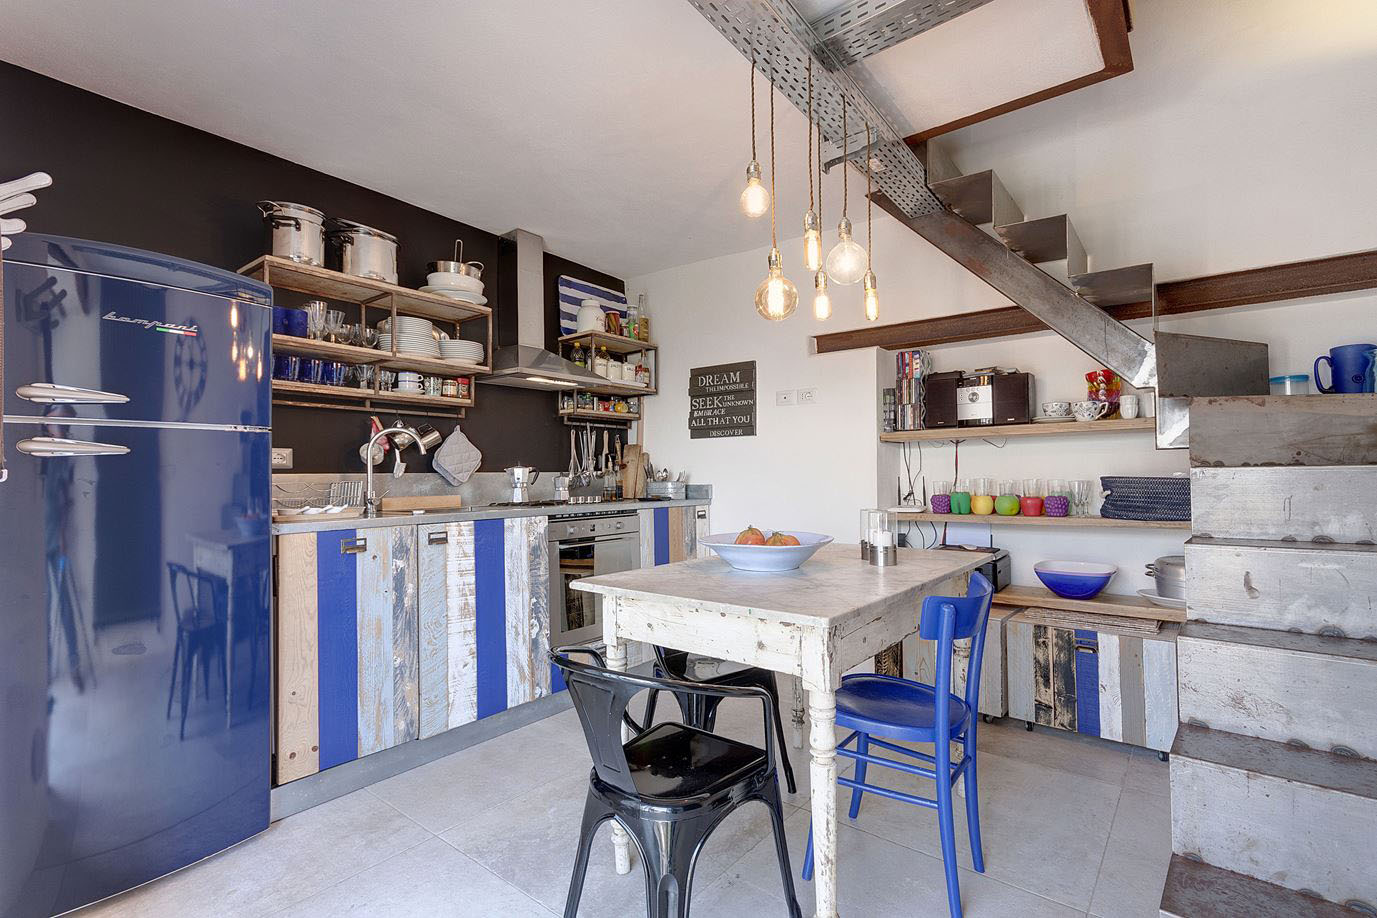 Chic Industrial Style Holiday Cottage In Tuscany Idesignarch